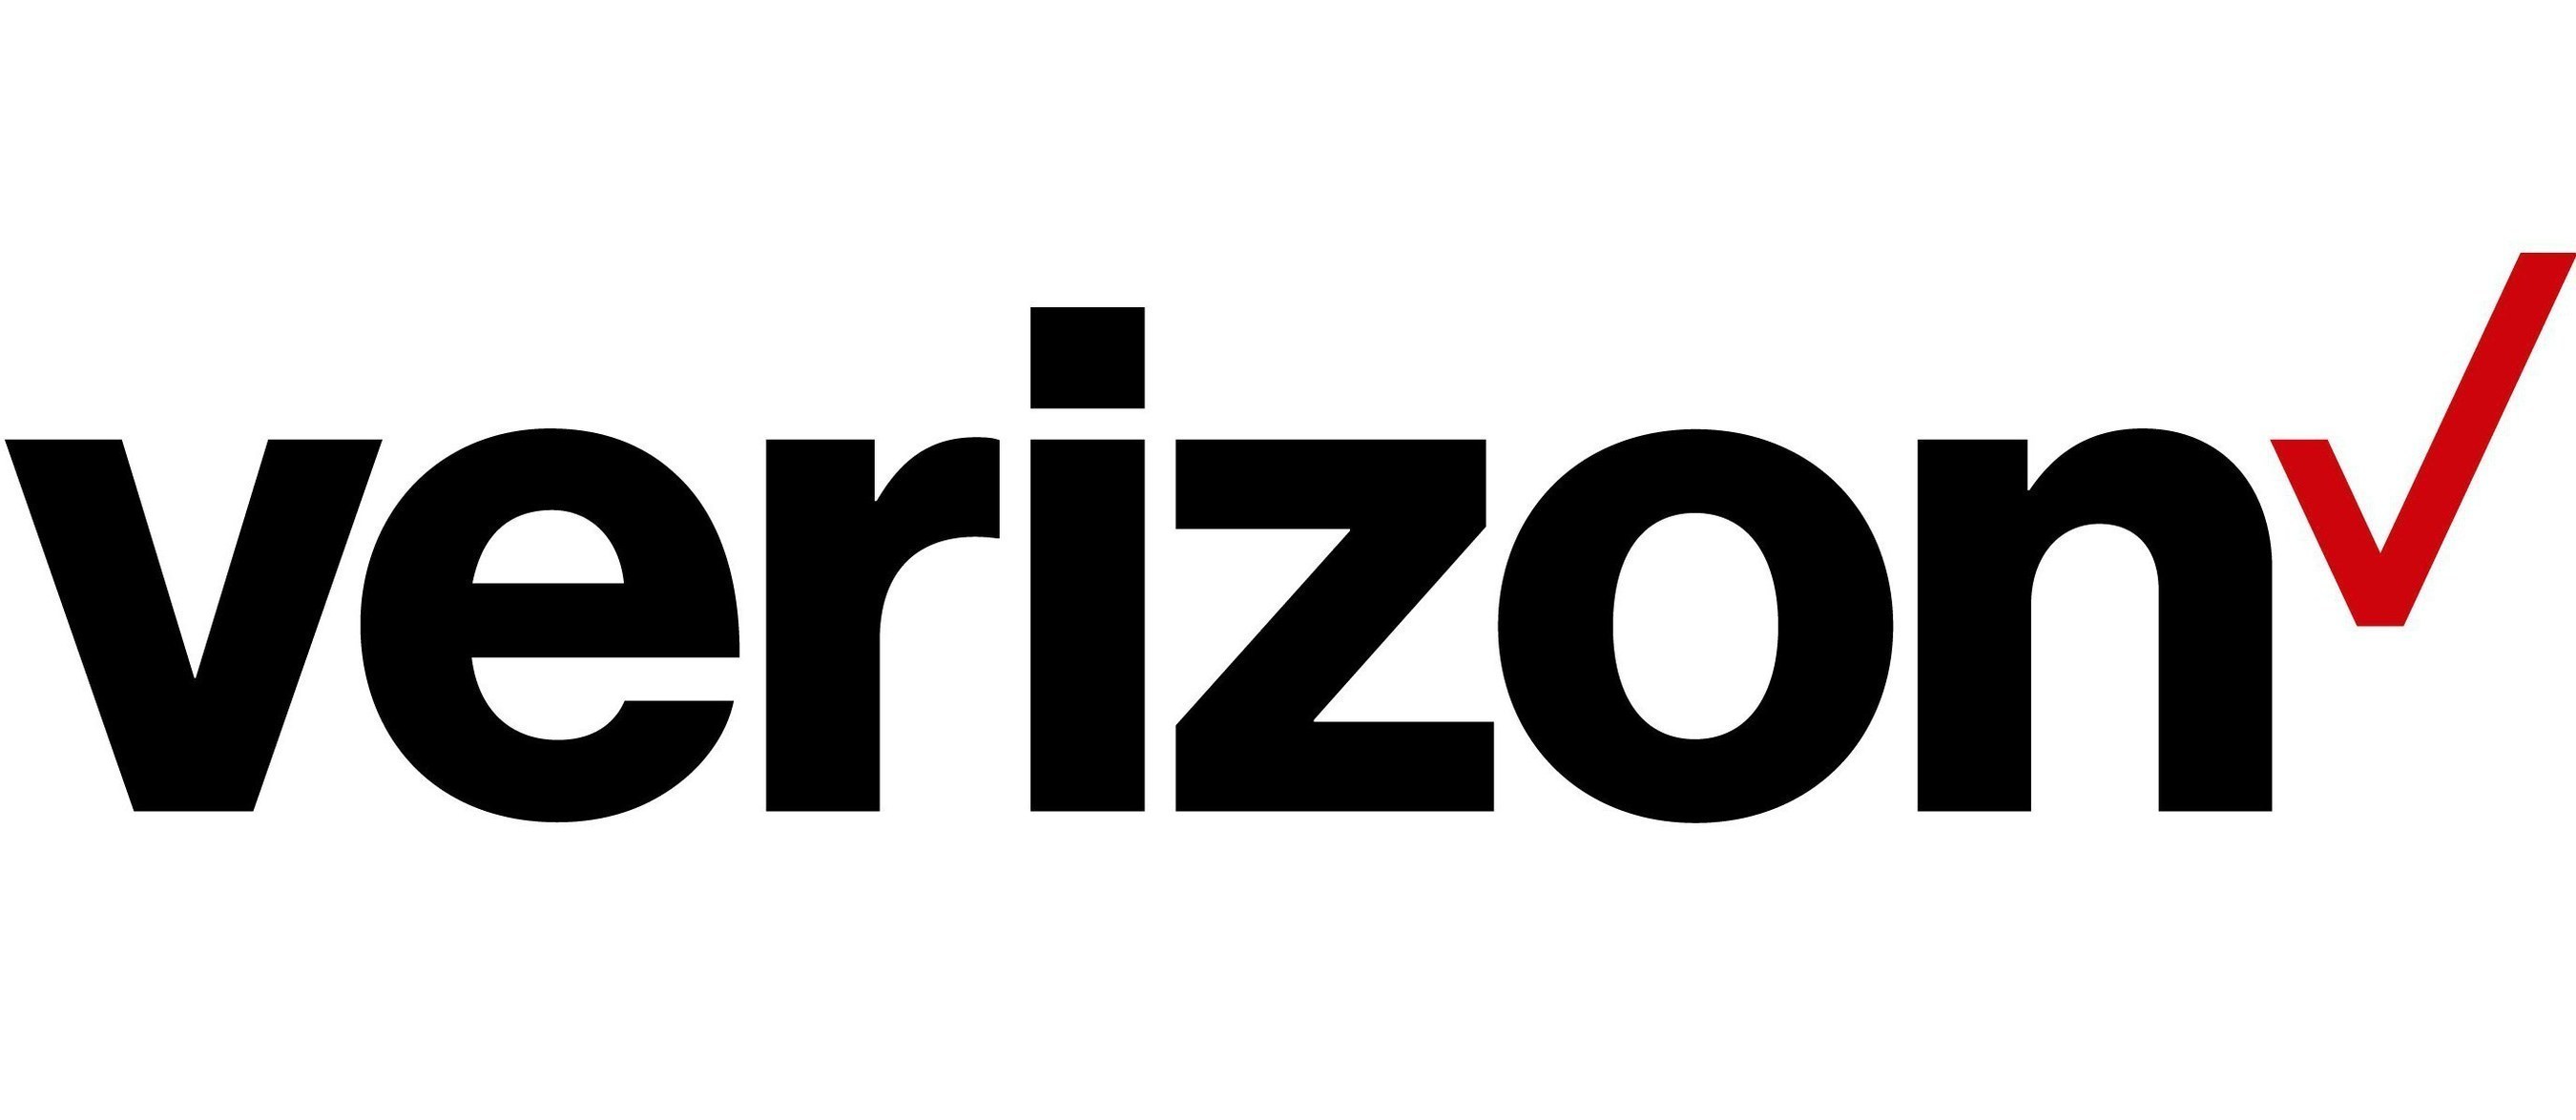 Learn How to Get a Verizon Credit Card